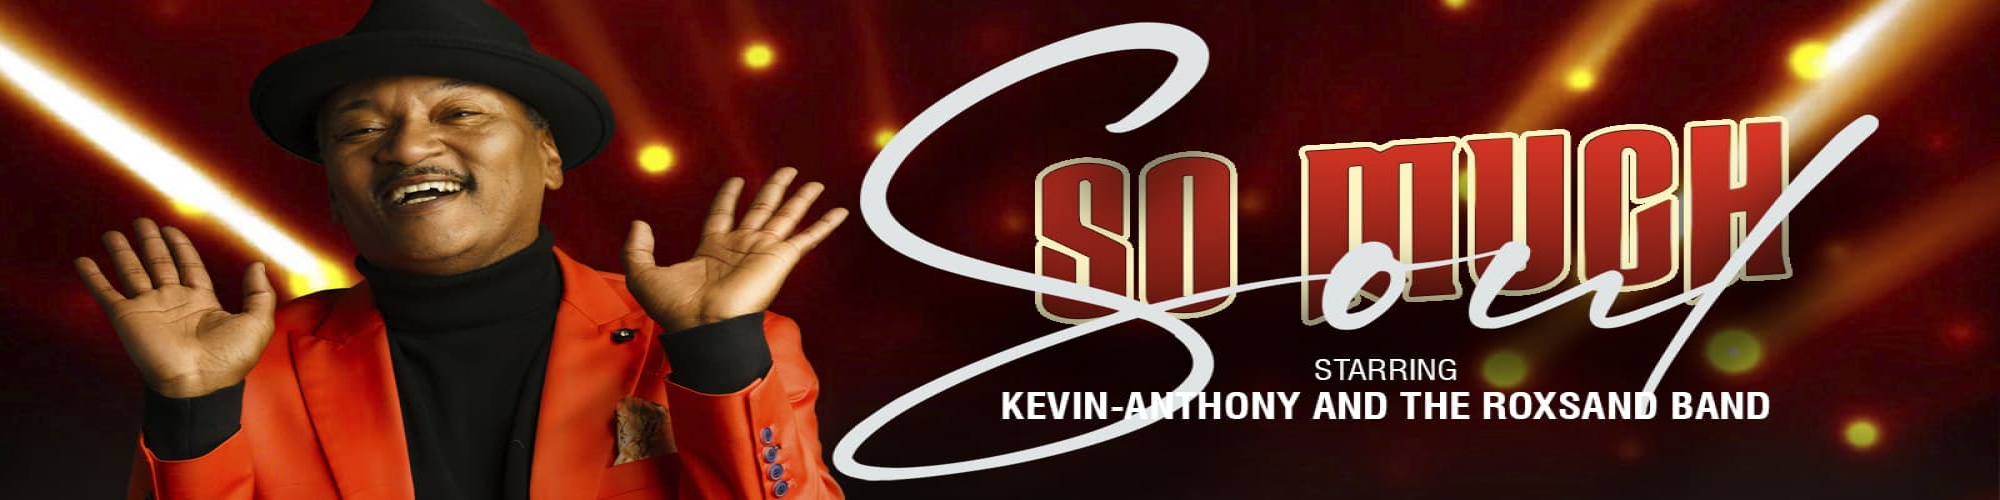 SO MUCH SOUL, starring Kevin-Anthony 